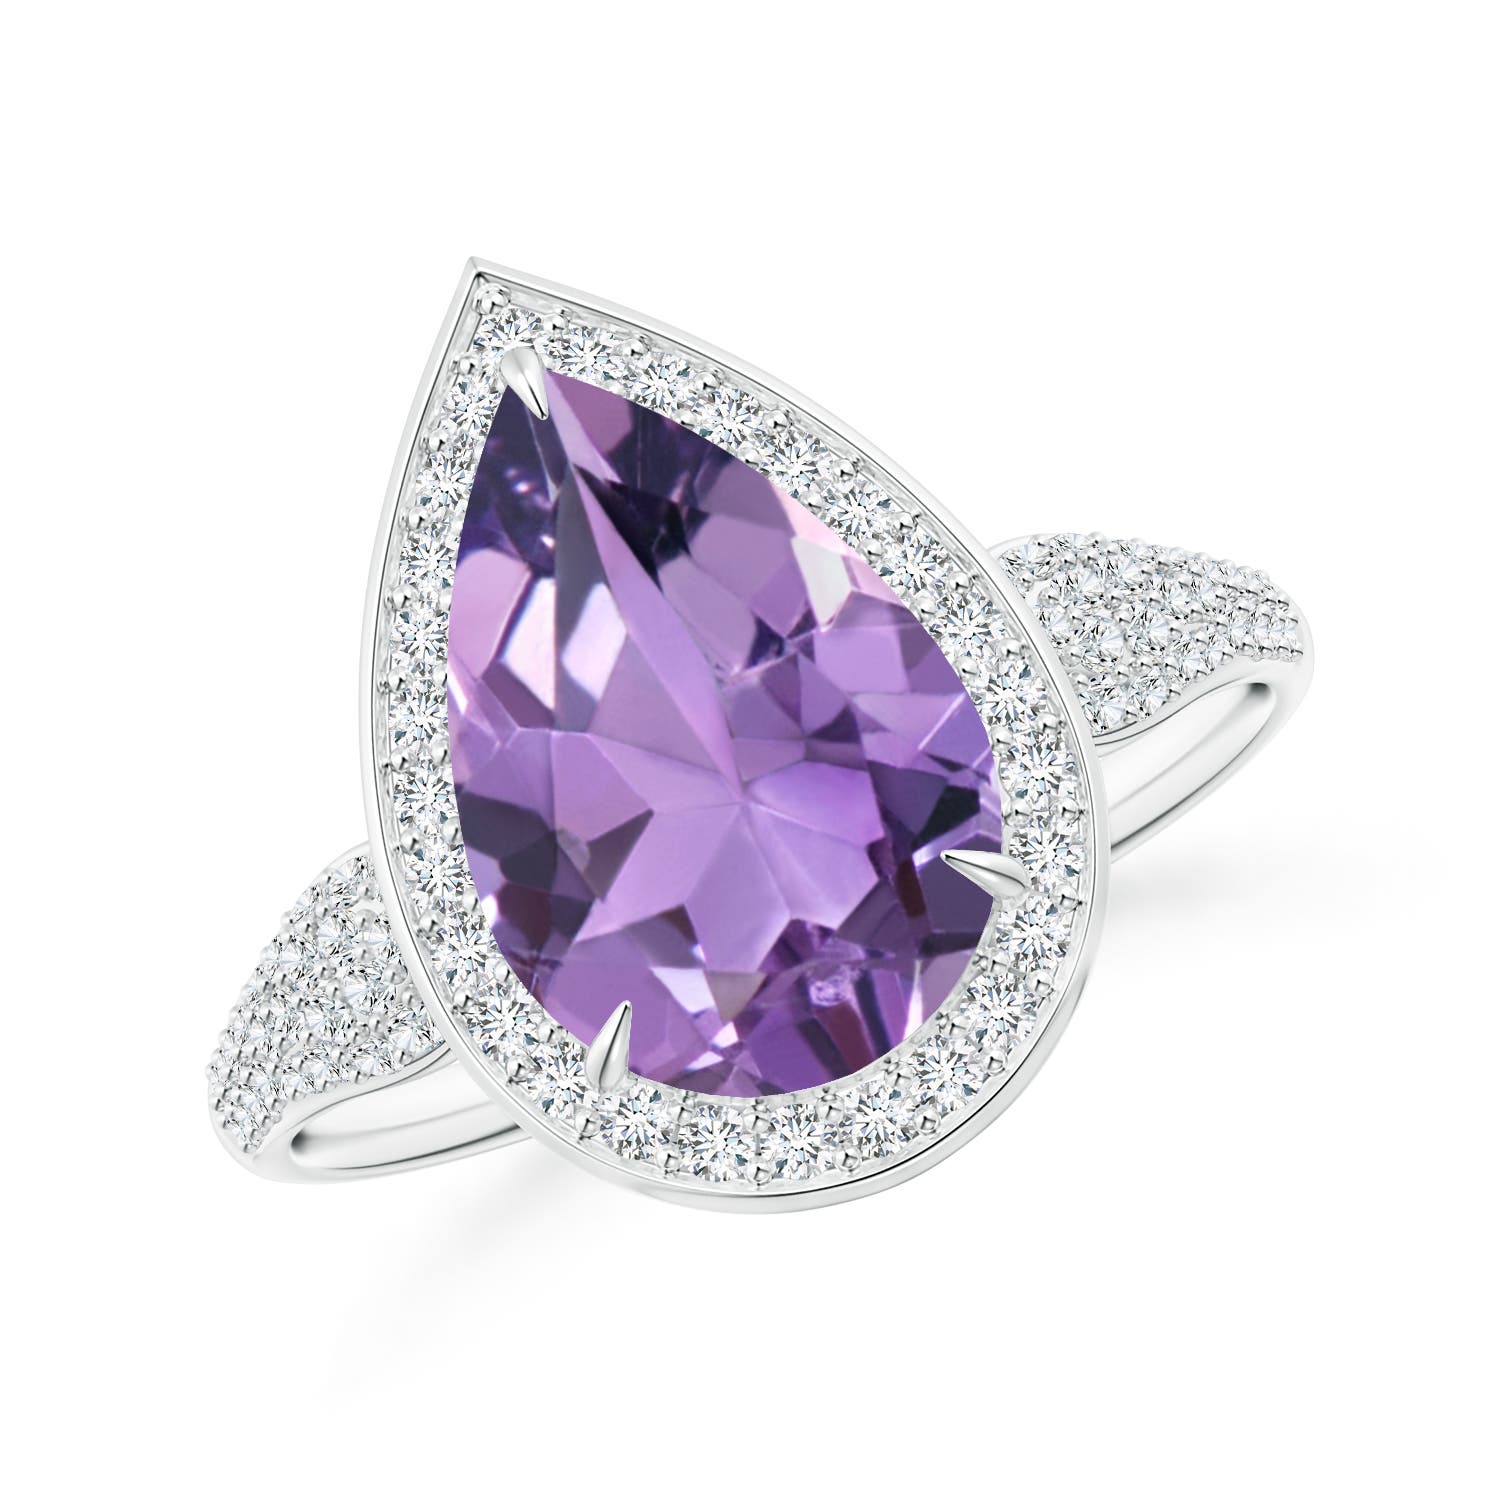 A - Amethyst / 3.07 CT / 14 KT White Gold